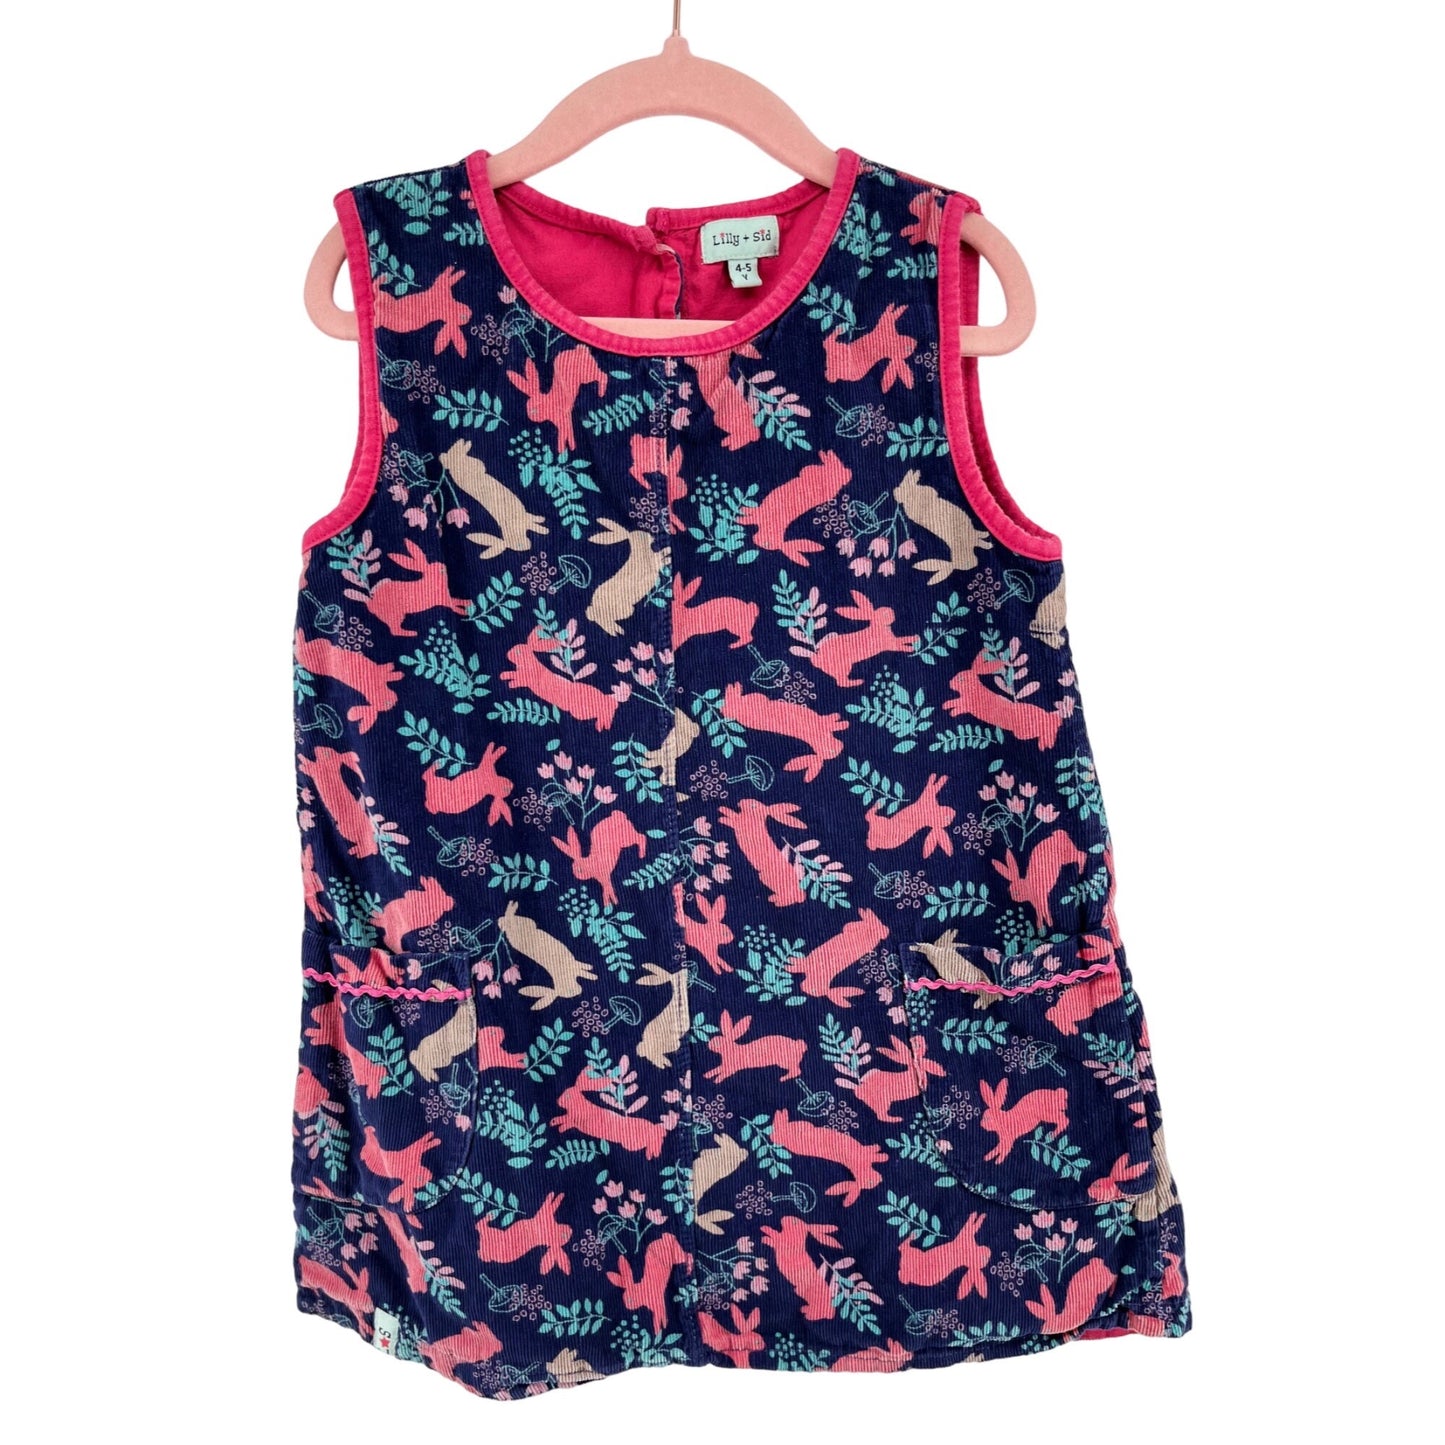 Lilly + Sid Baby Girl's Size 4-5 Years Navy/Pink/Green/Tan Bunny Print Corduroy Dress